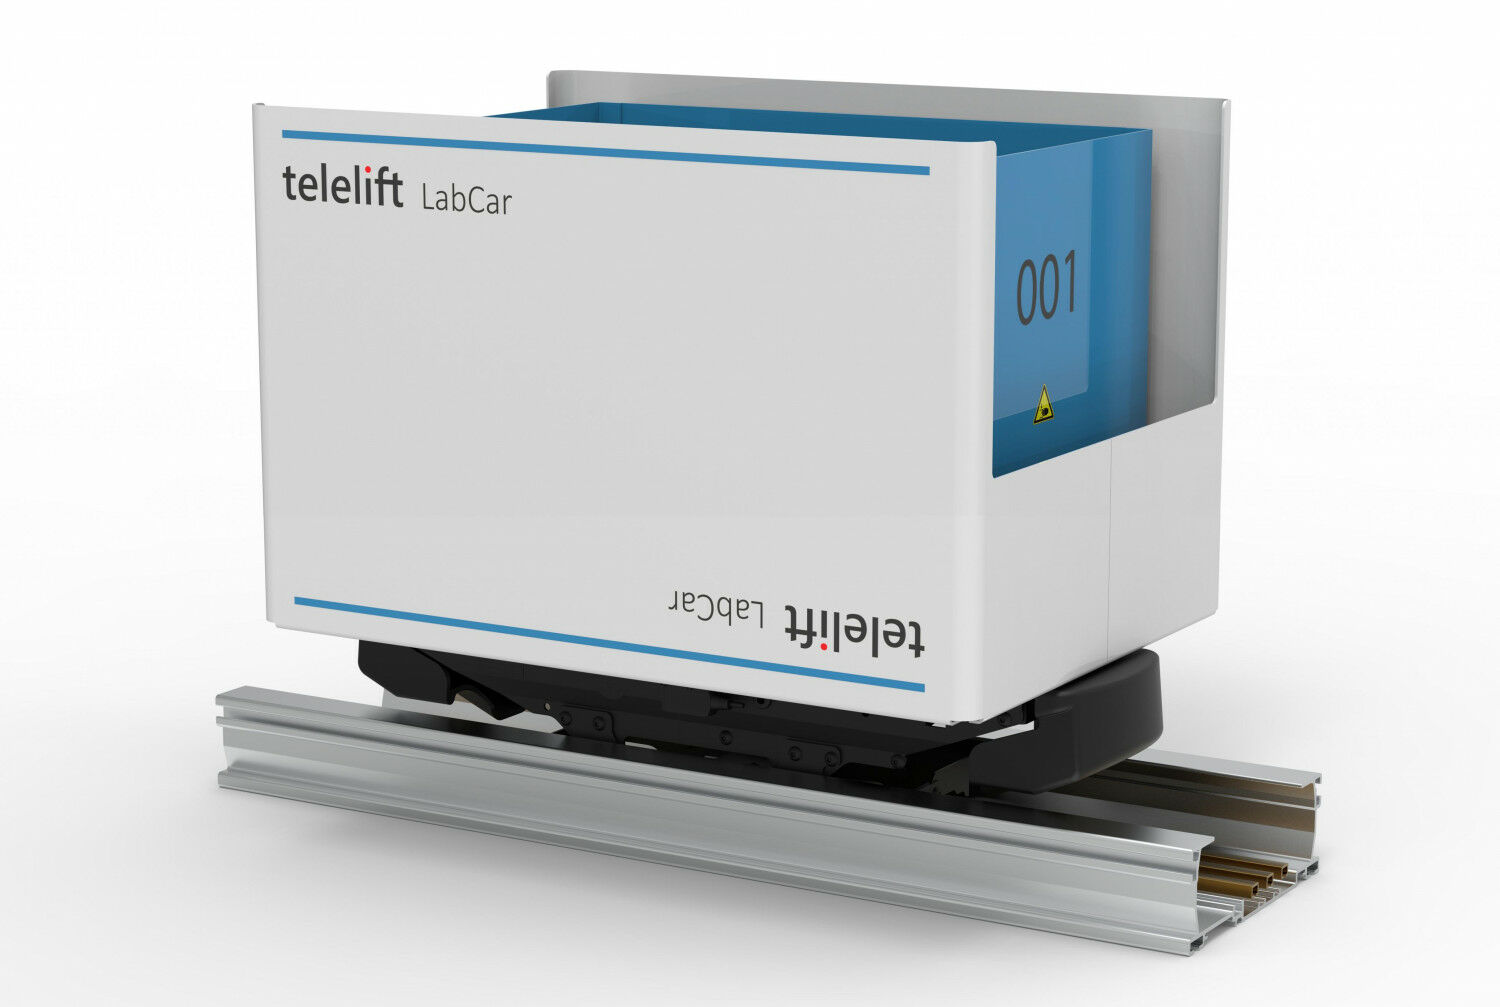 Telelift UniCar for laboratories